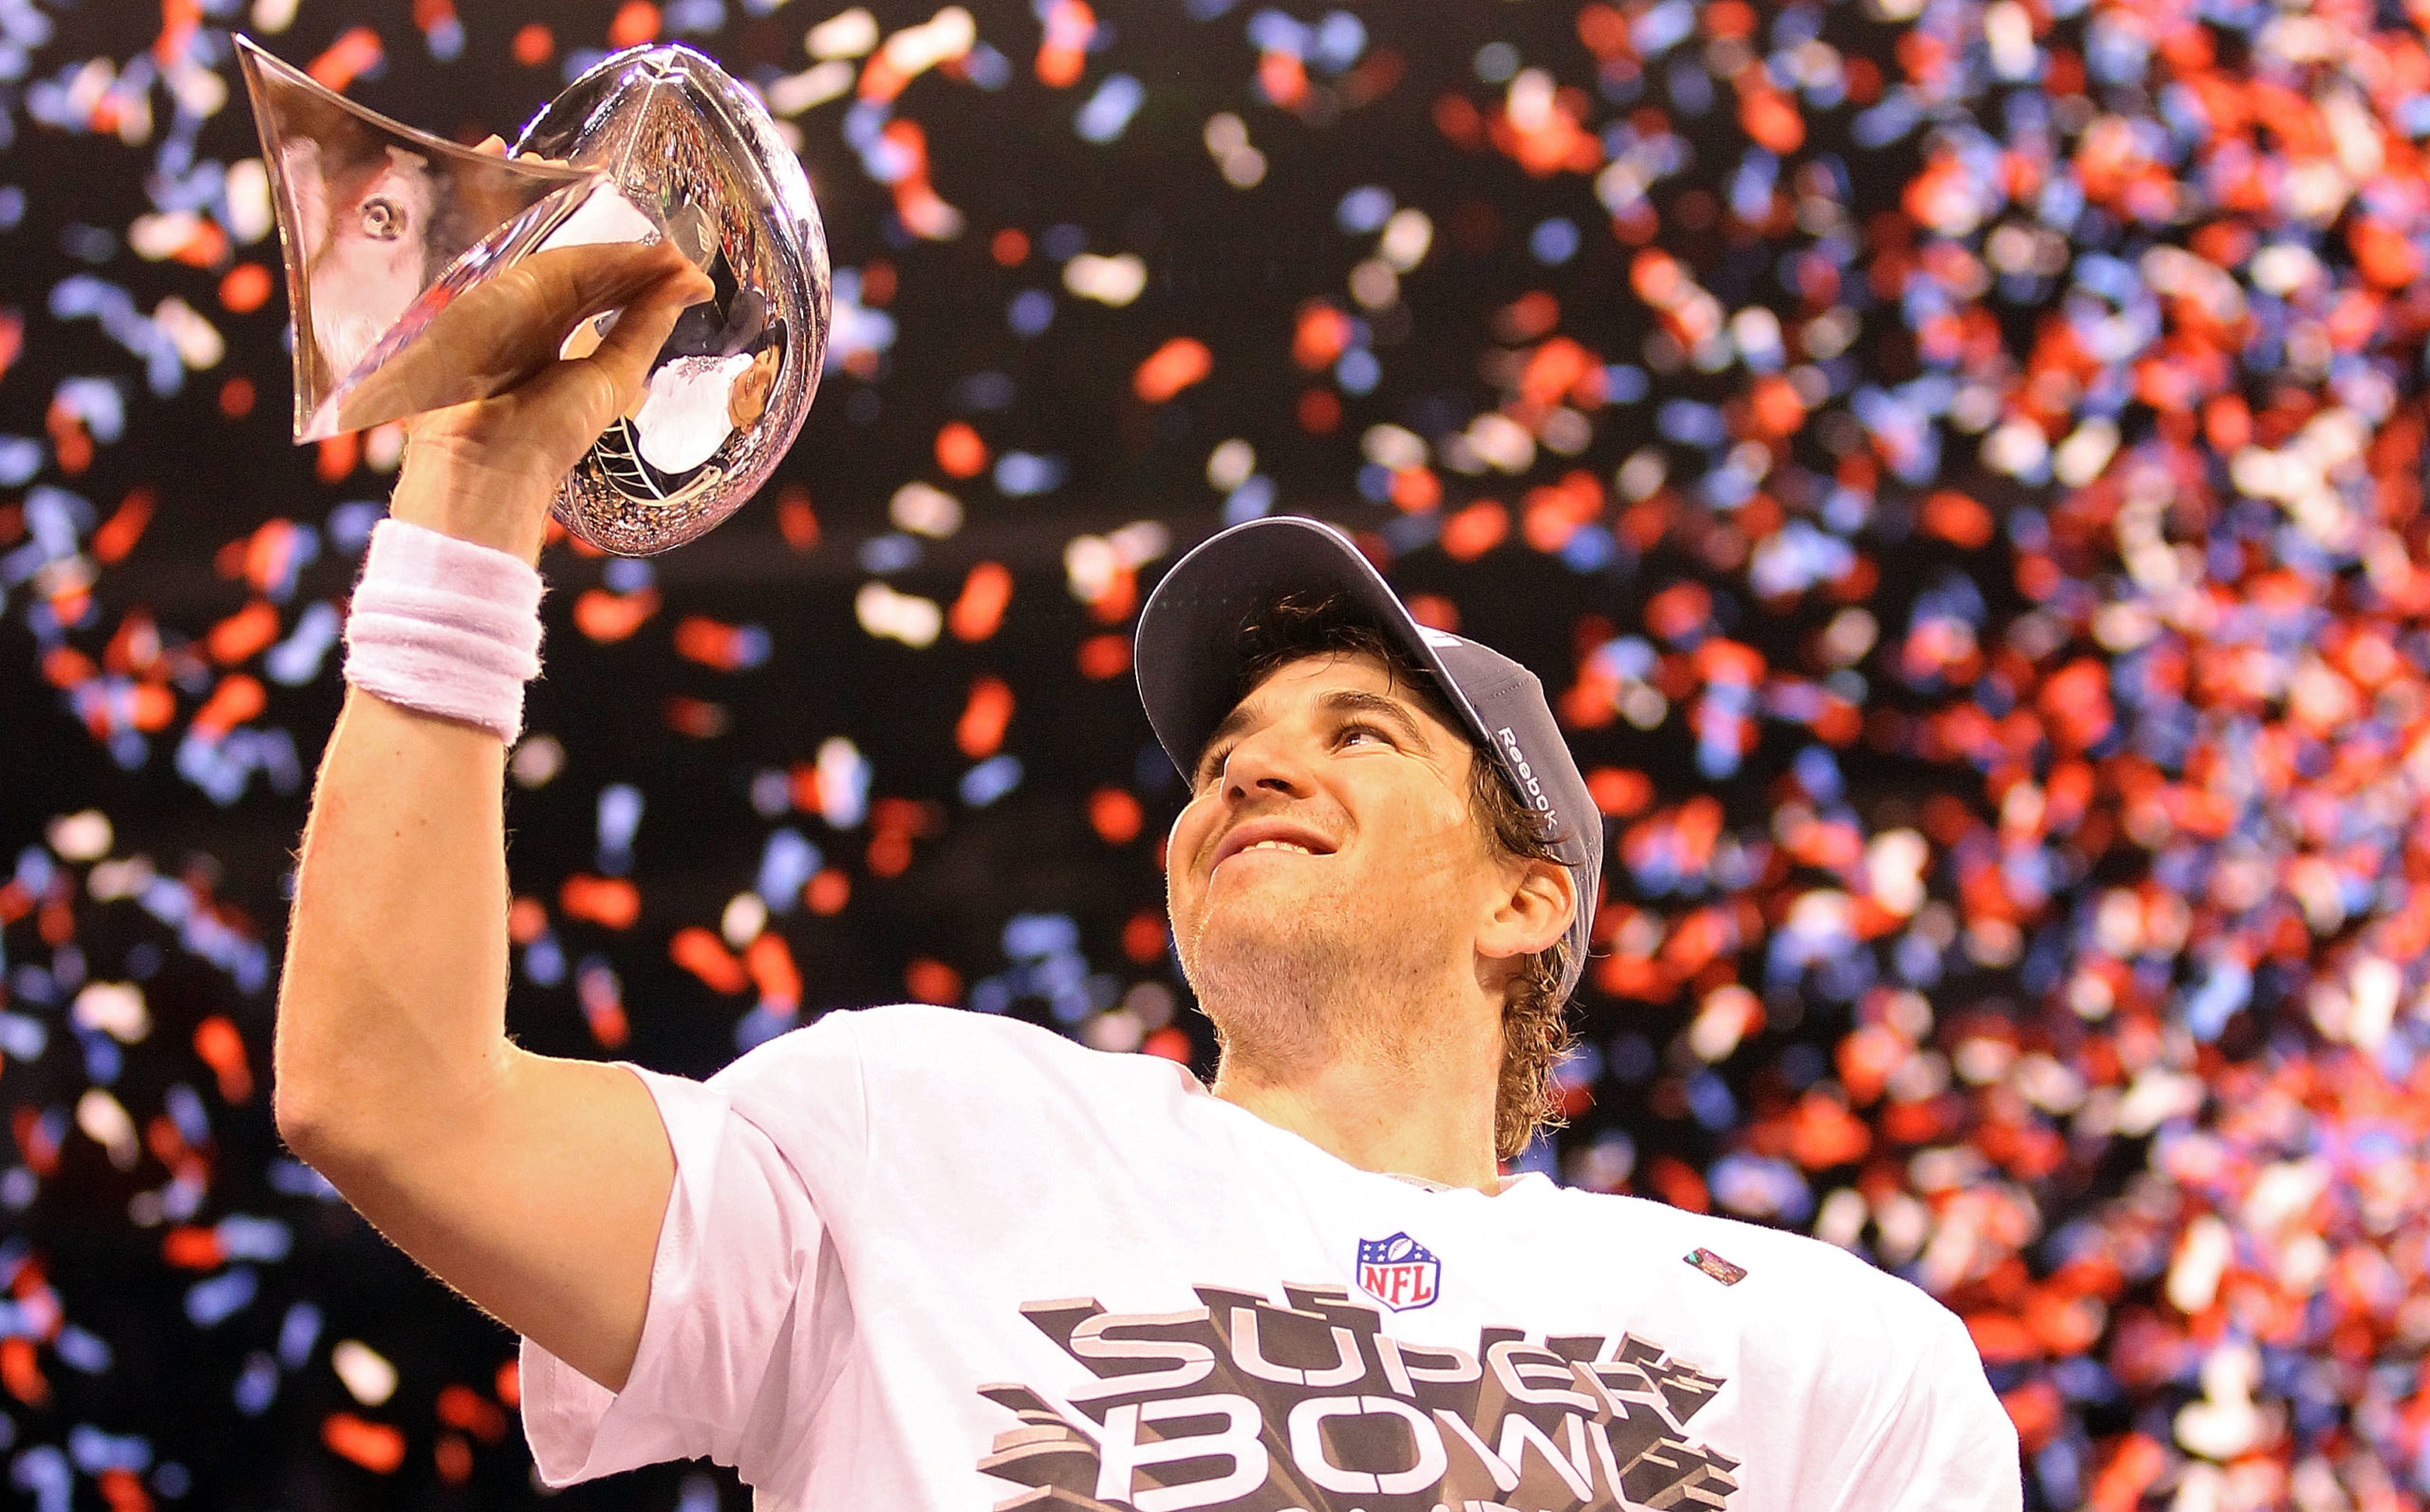 INDIANAPOLIS, IN - FEBRUARY 05: Quarterback Eli Manning #10 of the New York Giants poses with the Vince Lombardi Trophy after the Giants defeated the Patriots by a score of 21-17 in Super Bowl XLVI at Lucas Oil Stadium on February 5, 2012 in Indianapolis, Indiana. Ezra Shaw/Getty Images